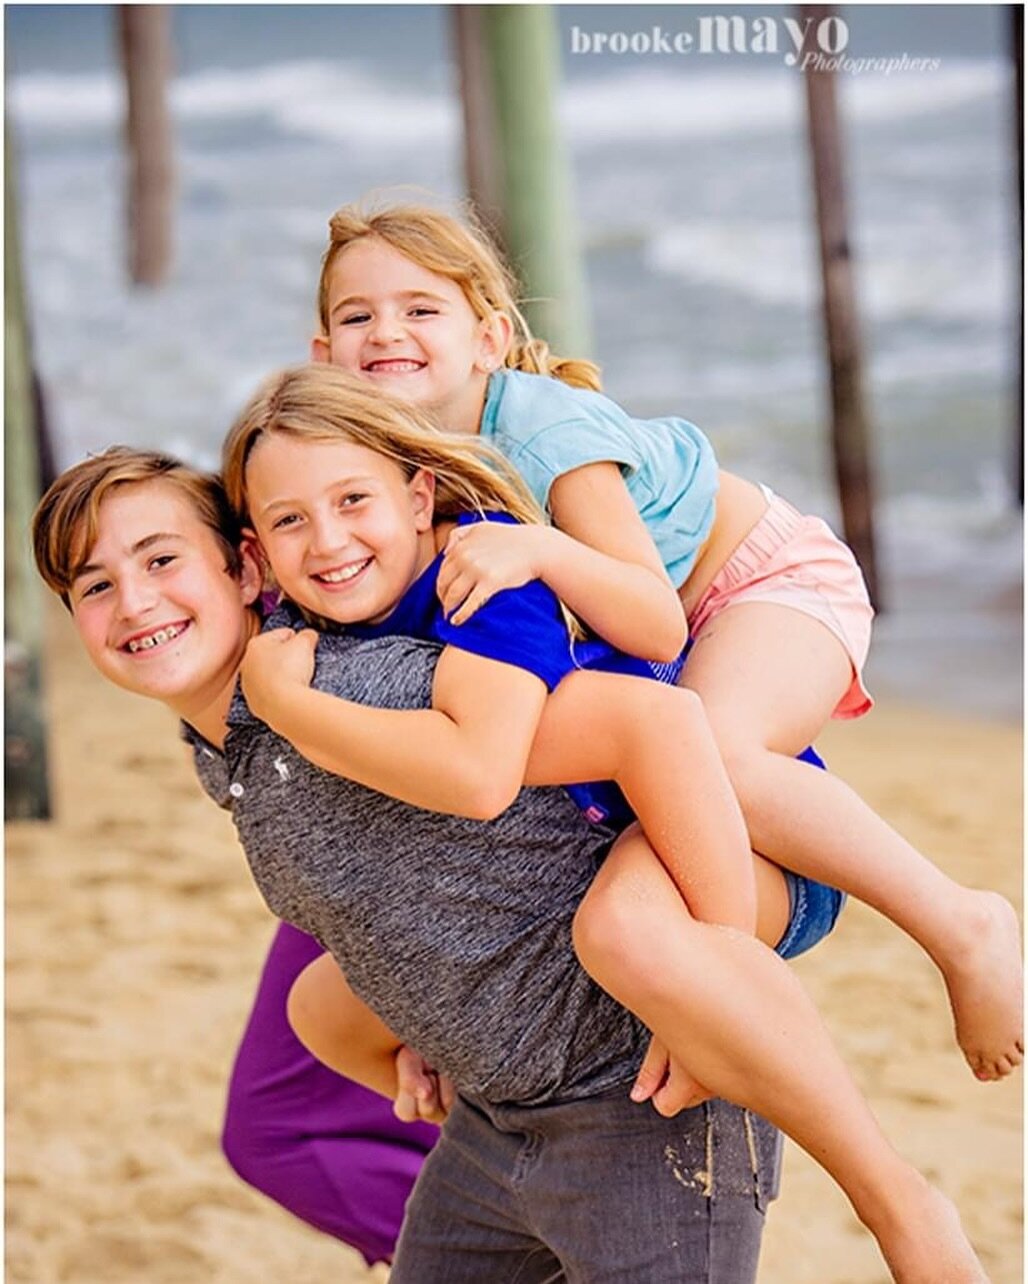 These smiling faces are sure to brighten this rainy OBX day! 
.
.
.
#smiles #outerbanks #outerbanksnc #outerbanksphotography #obx #obxnc #obxphotographer #obxphotography #kittyhawk #kittyhawkpier #kittyhawknc #kittyhawkbeach #siblings #family #family